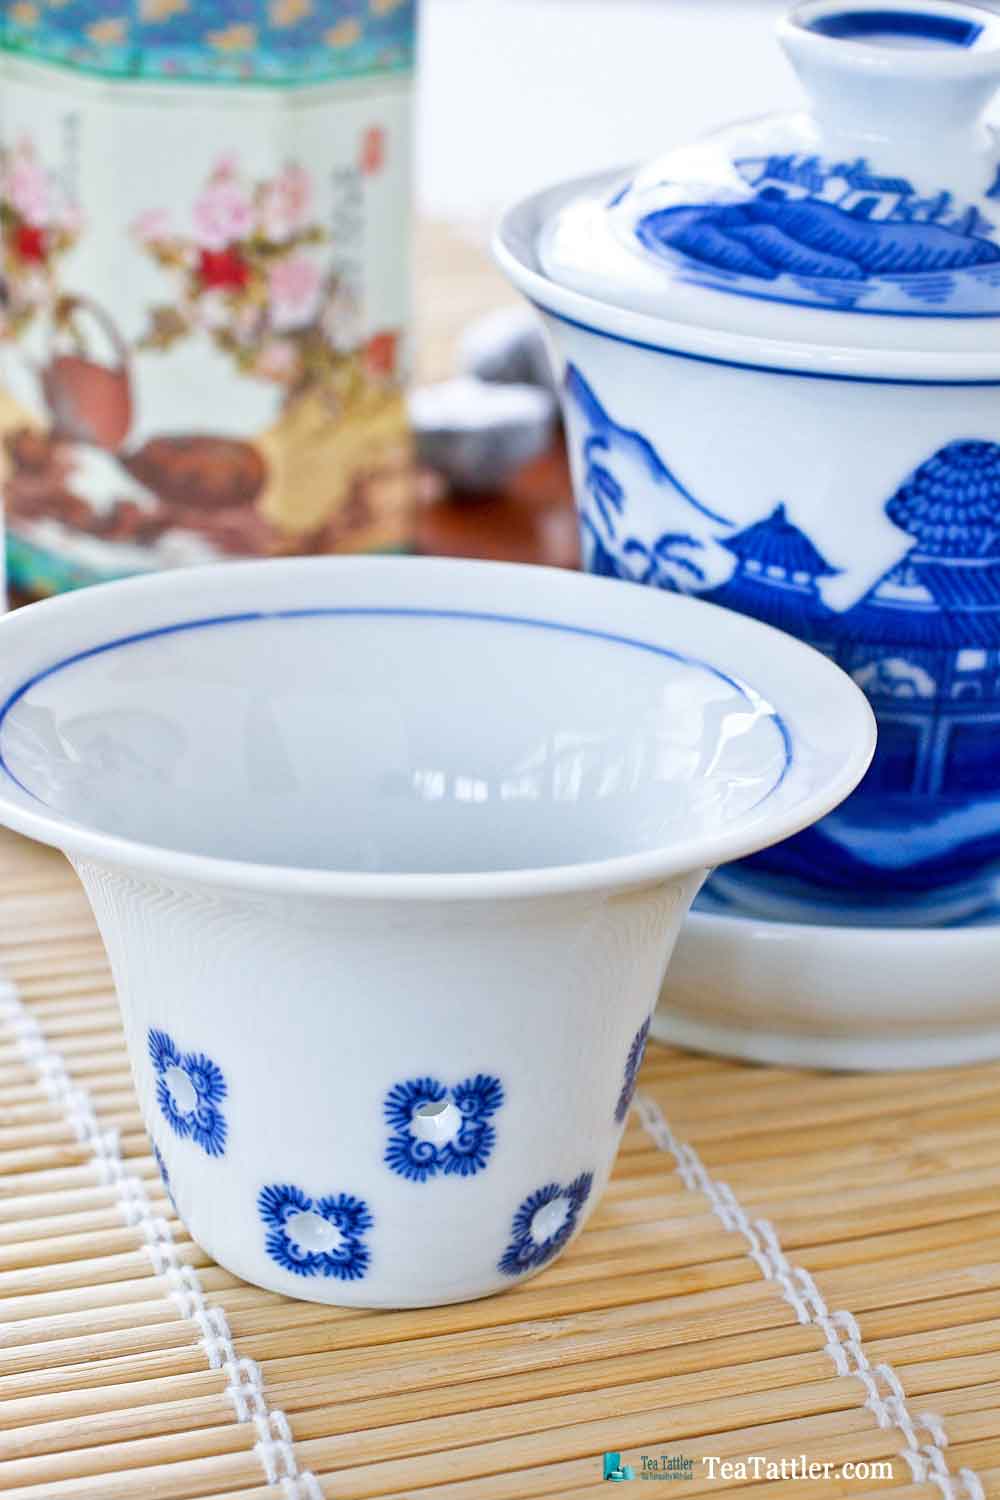 Blue and White Gaiwan with a pattern similar to the Spode Blue Willow pattern. It has a porcelain filter insert suitable for loose leave tea. | TeaTattler.com #gaiwan #liddedbowl